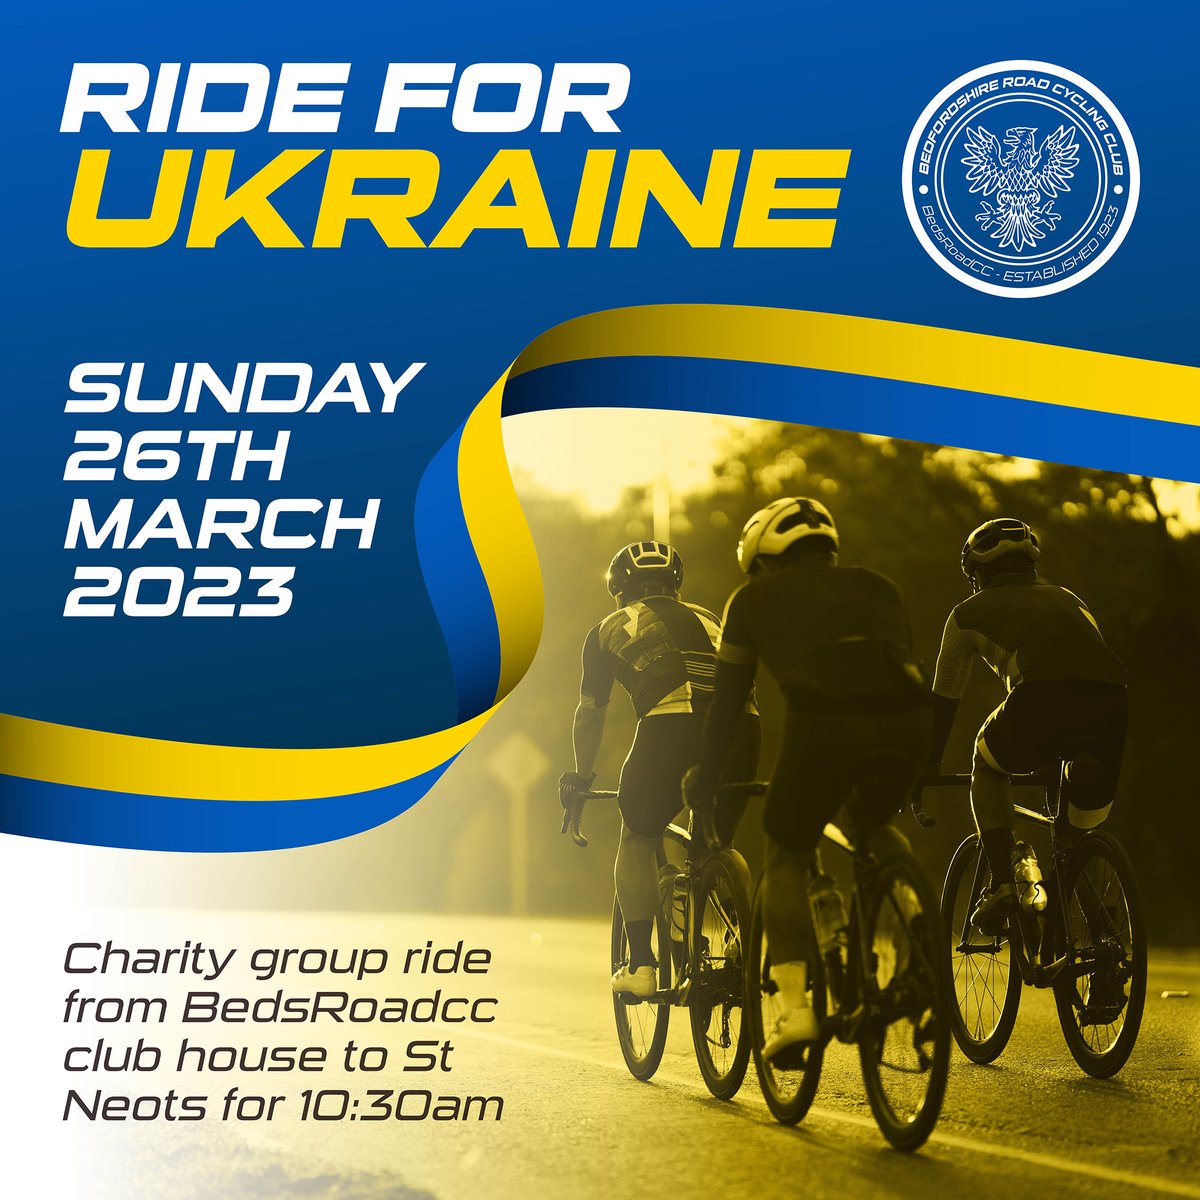 Ride for Ukraine - Sunday 26 March 2023. Group ride from BedsRoadcc club house to St Neots. Visit our Facebook page facebook.com/BedsRoadCC for full details All monies raised will go direct to the DEC Ukraine appeal.